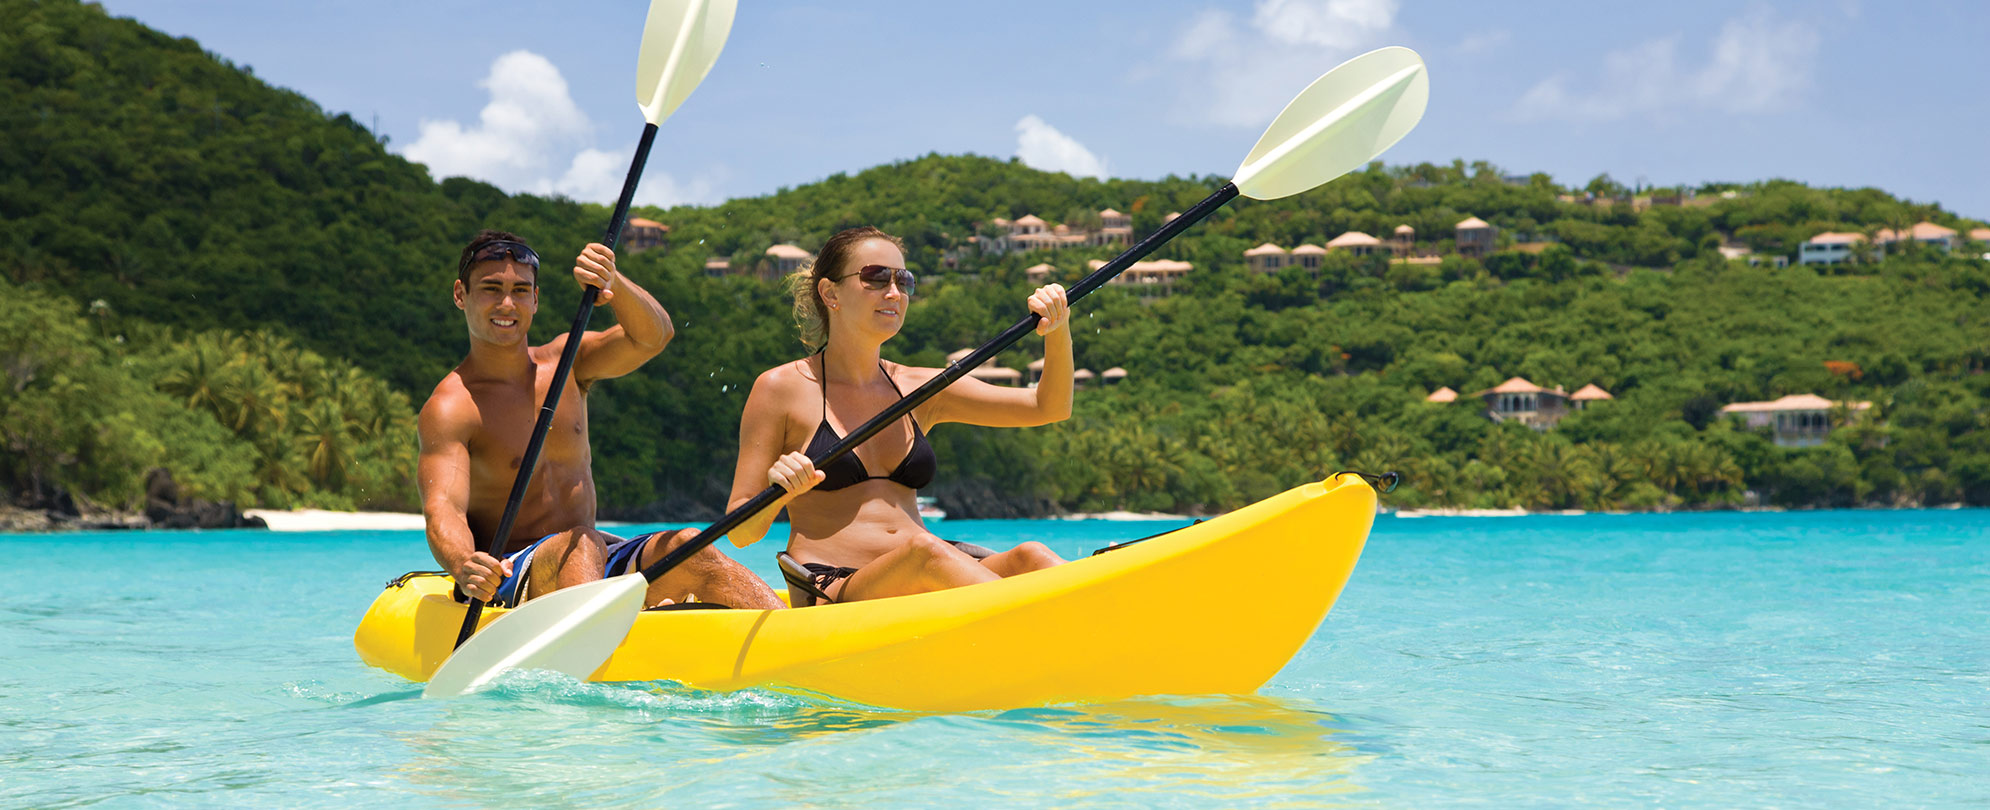 A man and woman paddle a double kayak in a tropical vacation destination.